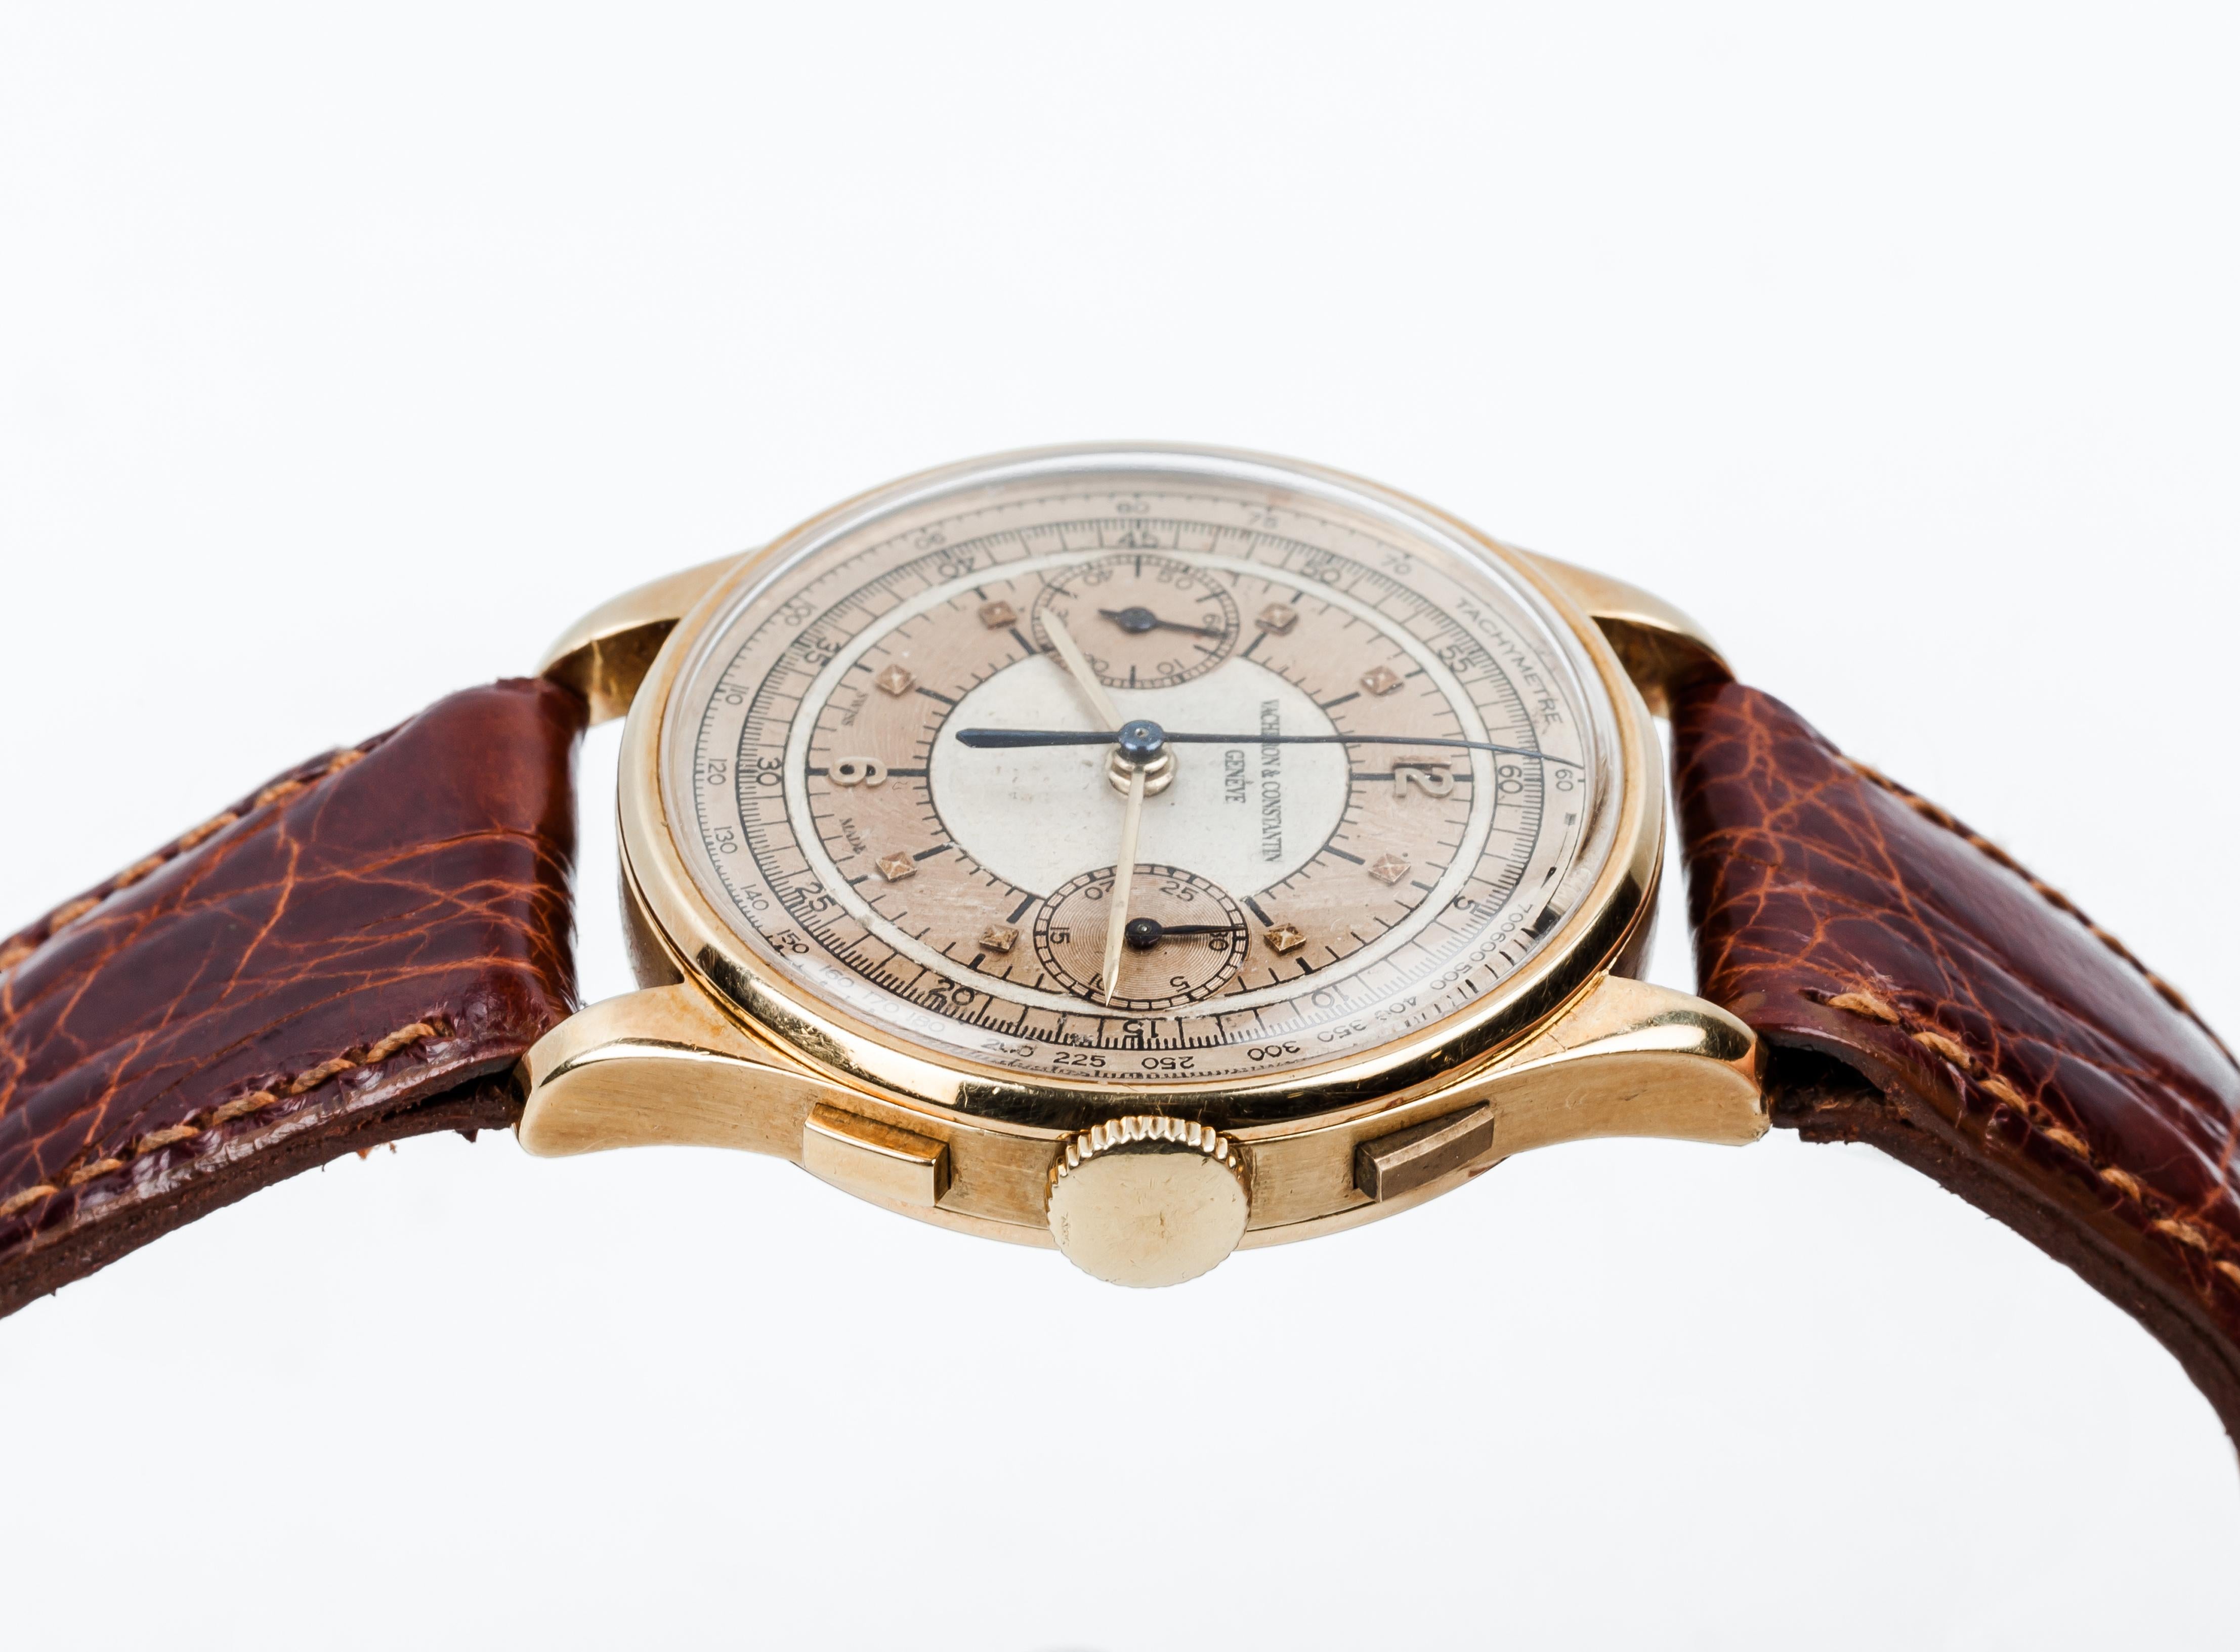 Rare vintage chronograph watch, Swiss VACHERON CONSTANTIN (Genéve), in original 18K yellow gold case, 34 mm. Manual winding mechanical movement, no. 446388, lever escapement, rubies. Original two-tone metallic dial with tachymetric scale, two